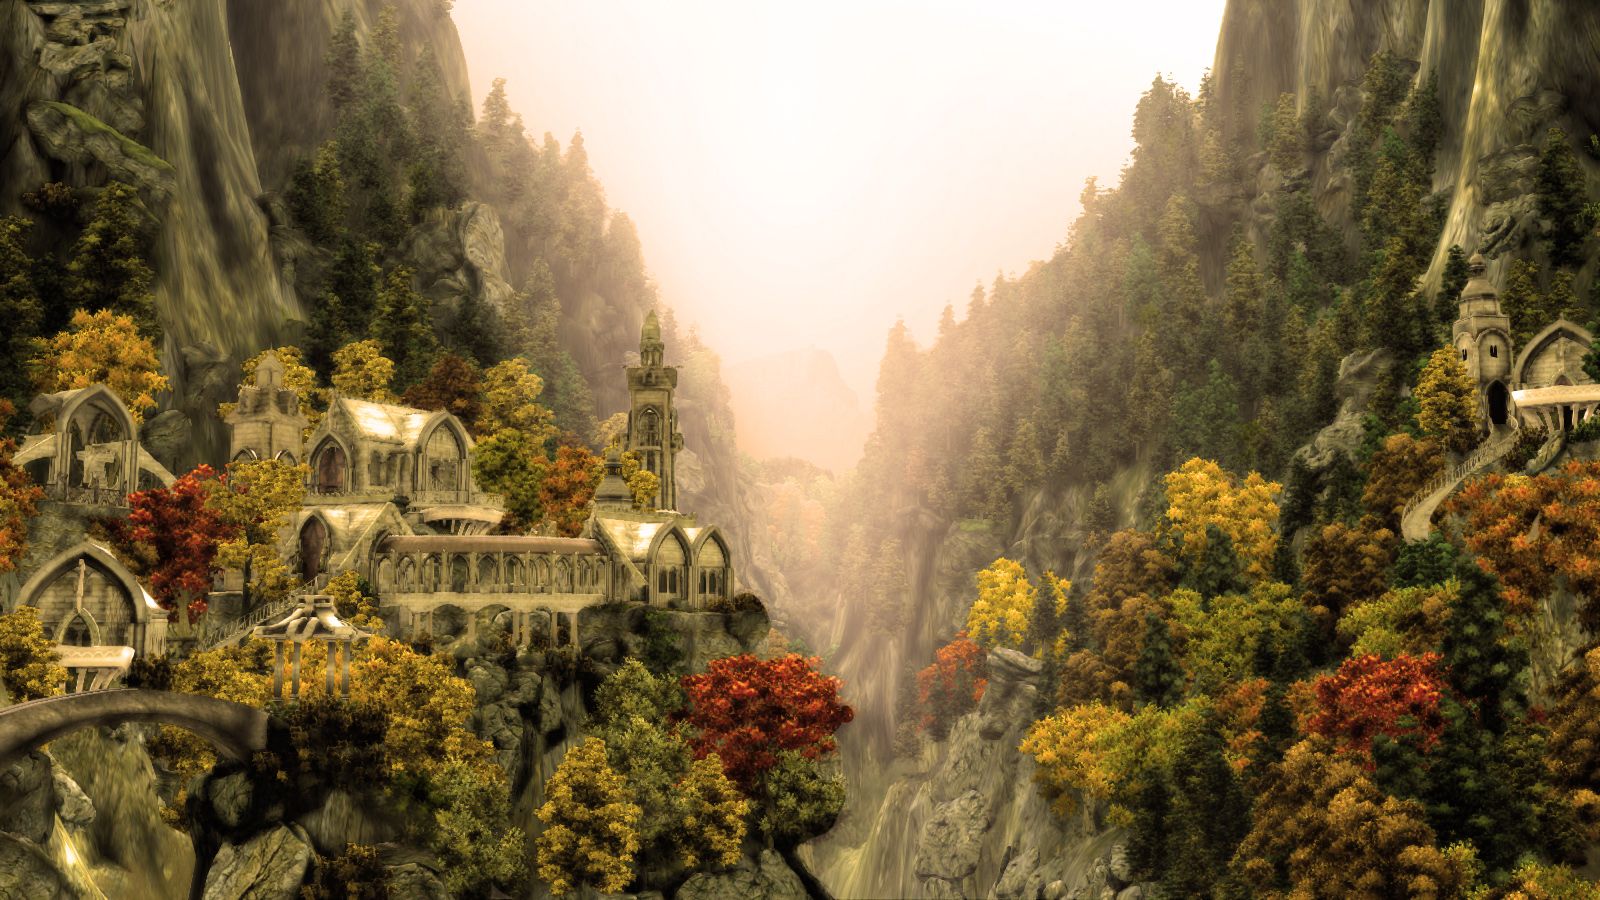 Rivendell Uploaded Image Nexus Forums. Lord of the rings, Fantasy castle, Lotr elves